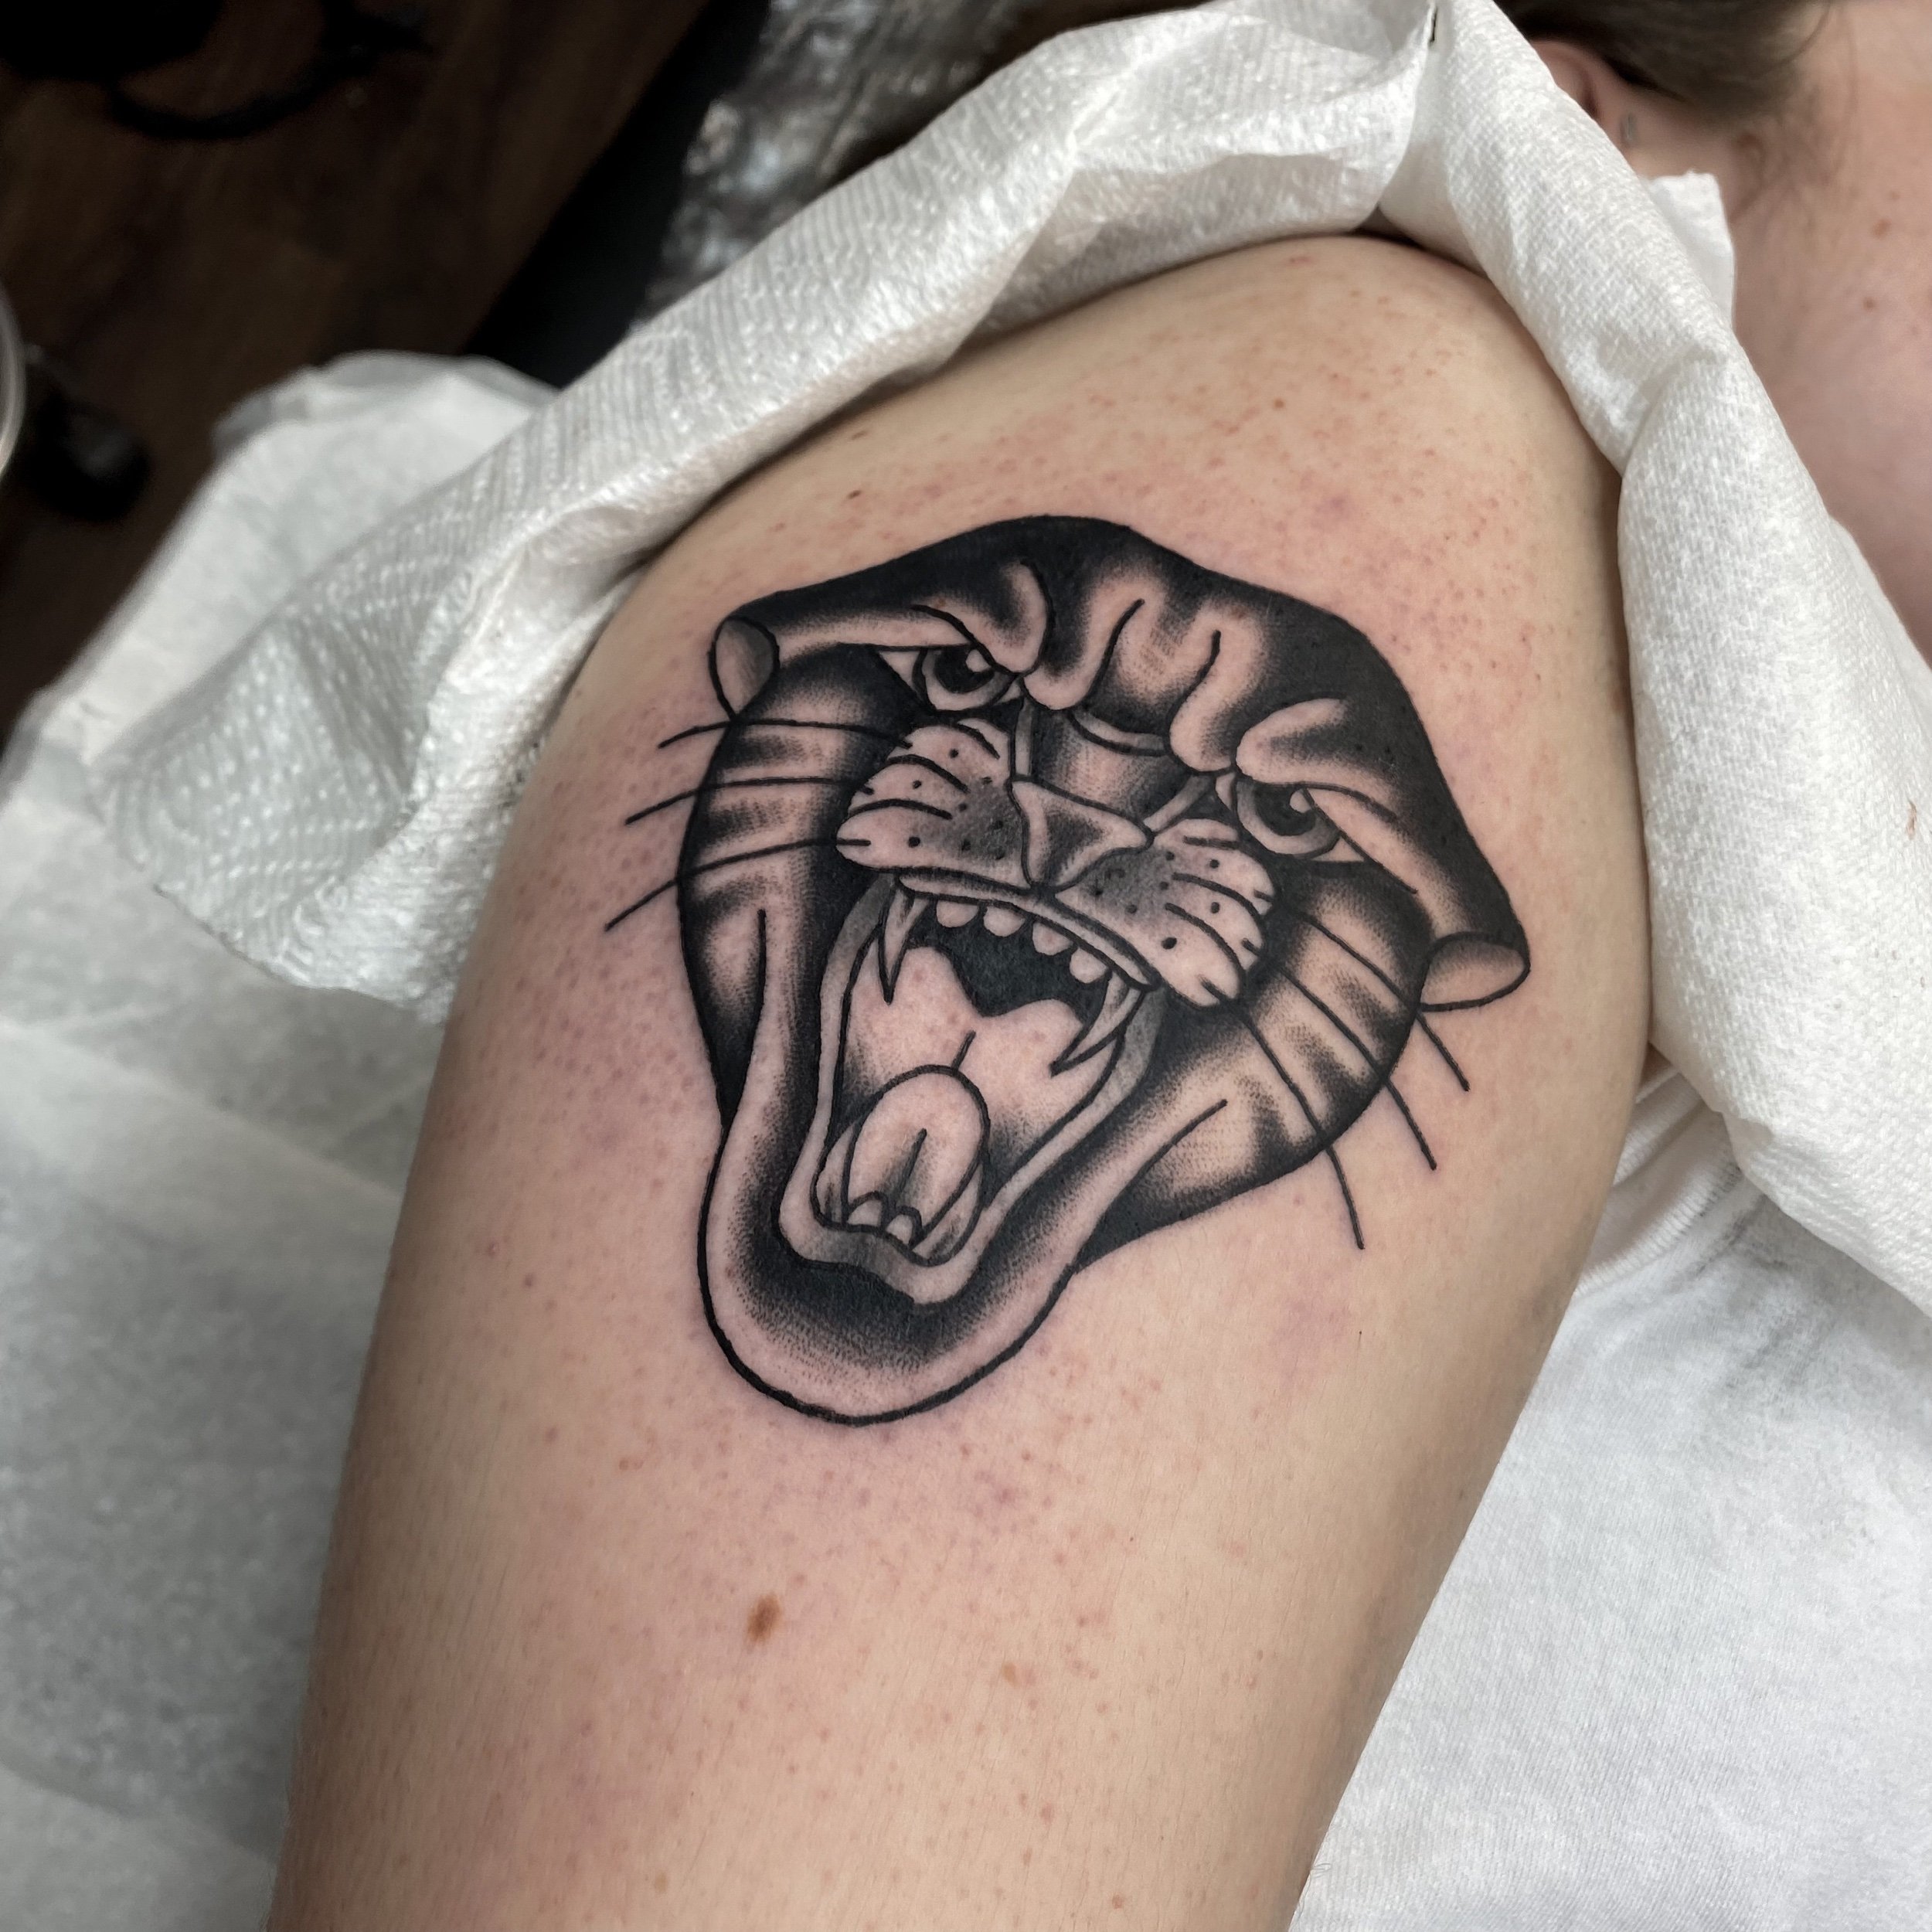 THE 10 BEST BLACK PANTHER TATTOO IDEAS YOU SHOULD SEE 